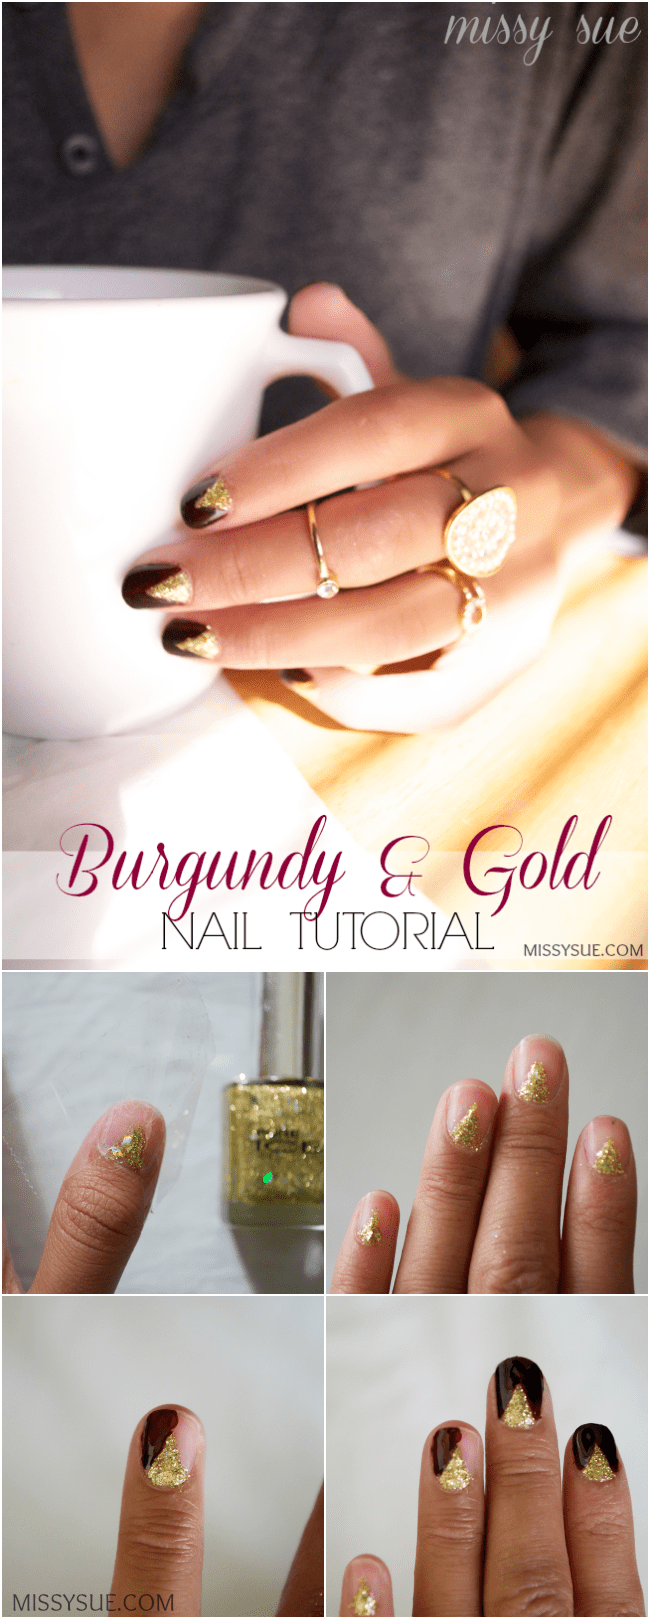 Burgundy and Gold Nail Tutorial | MissySue.com